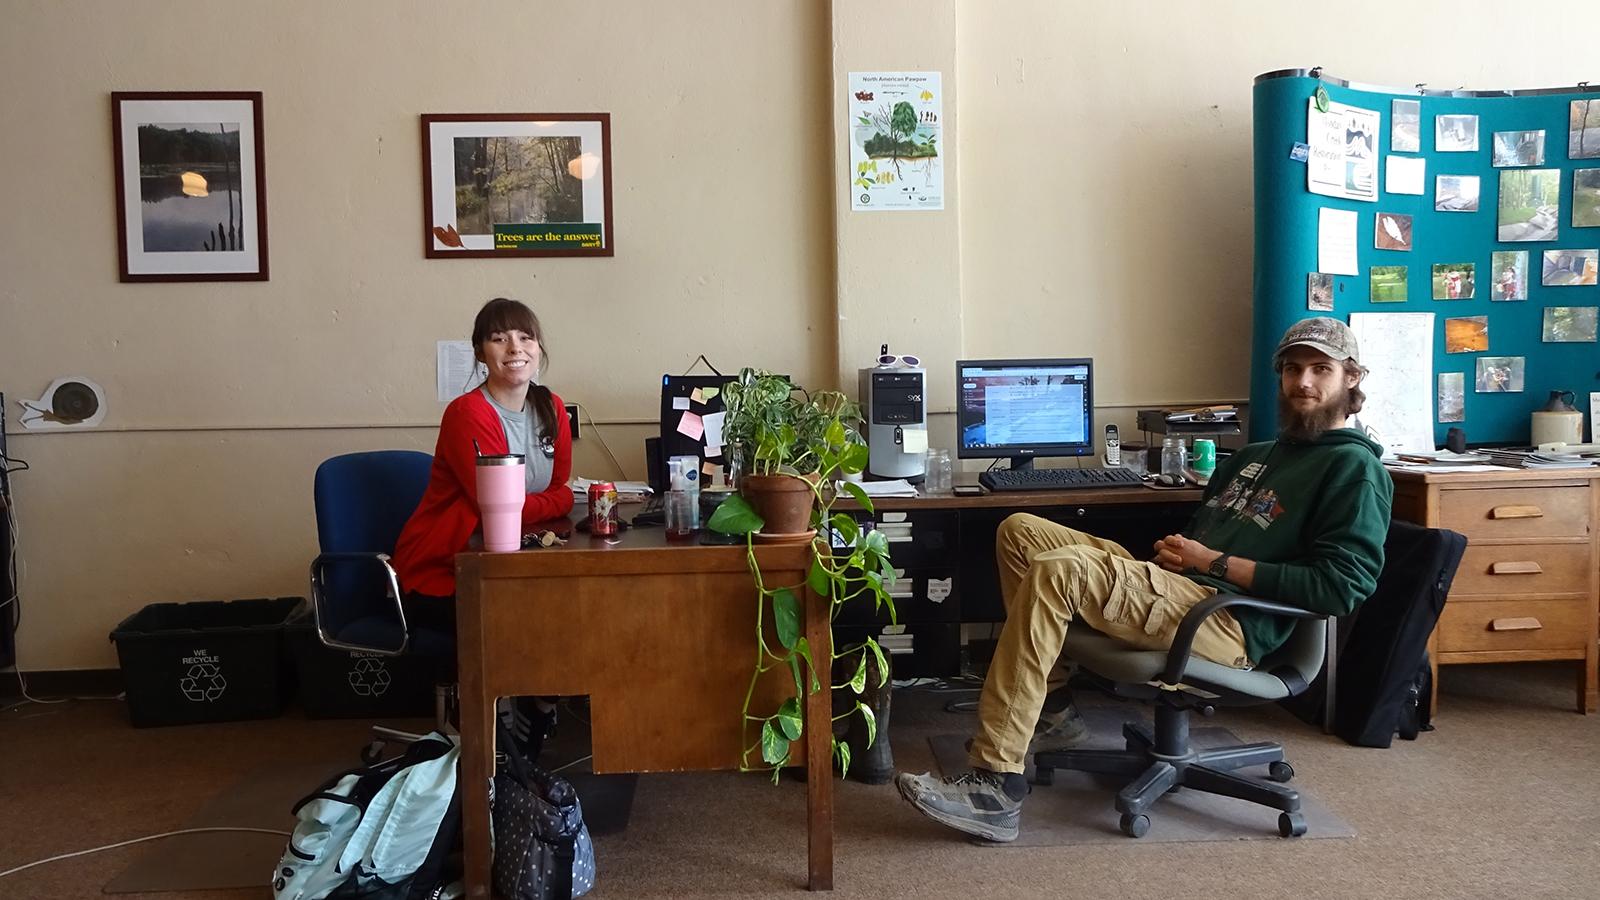 MCRP’s current Americorps members: Kylee (left) and Ricky (right) in MCRP’s office